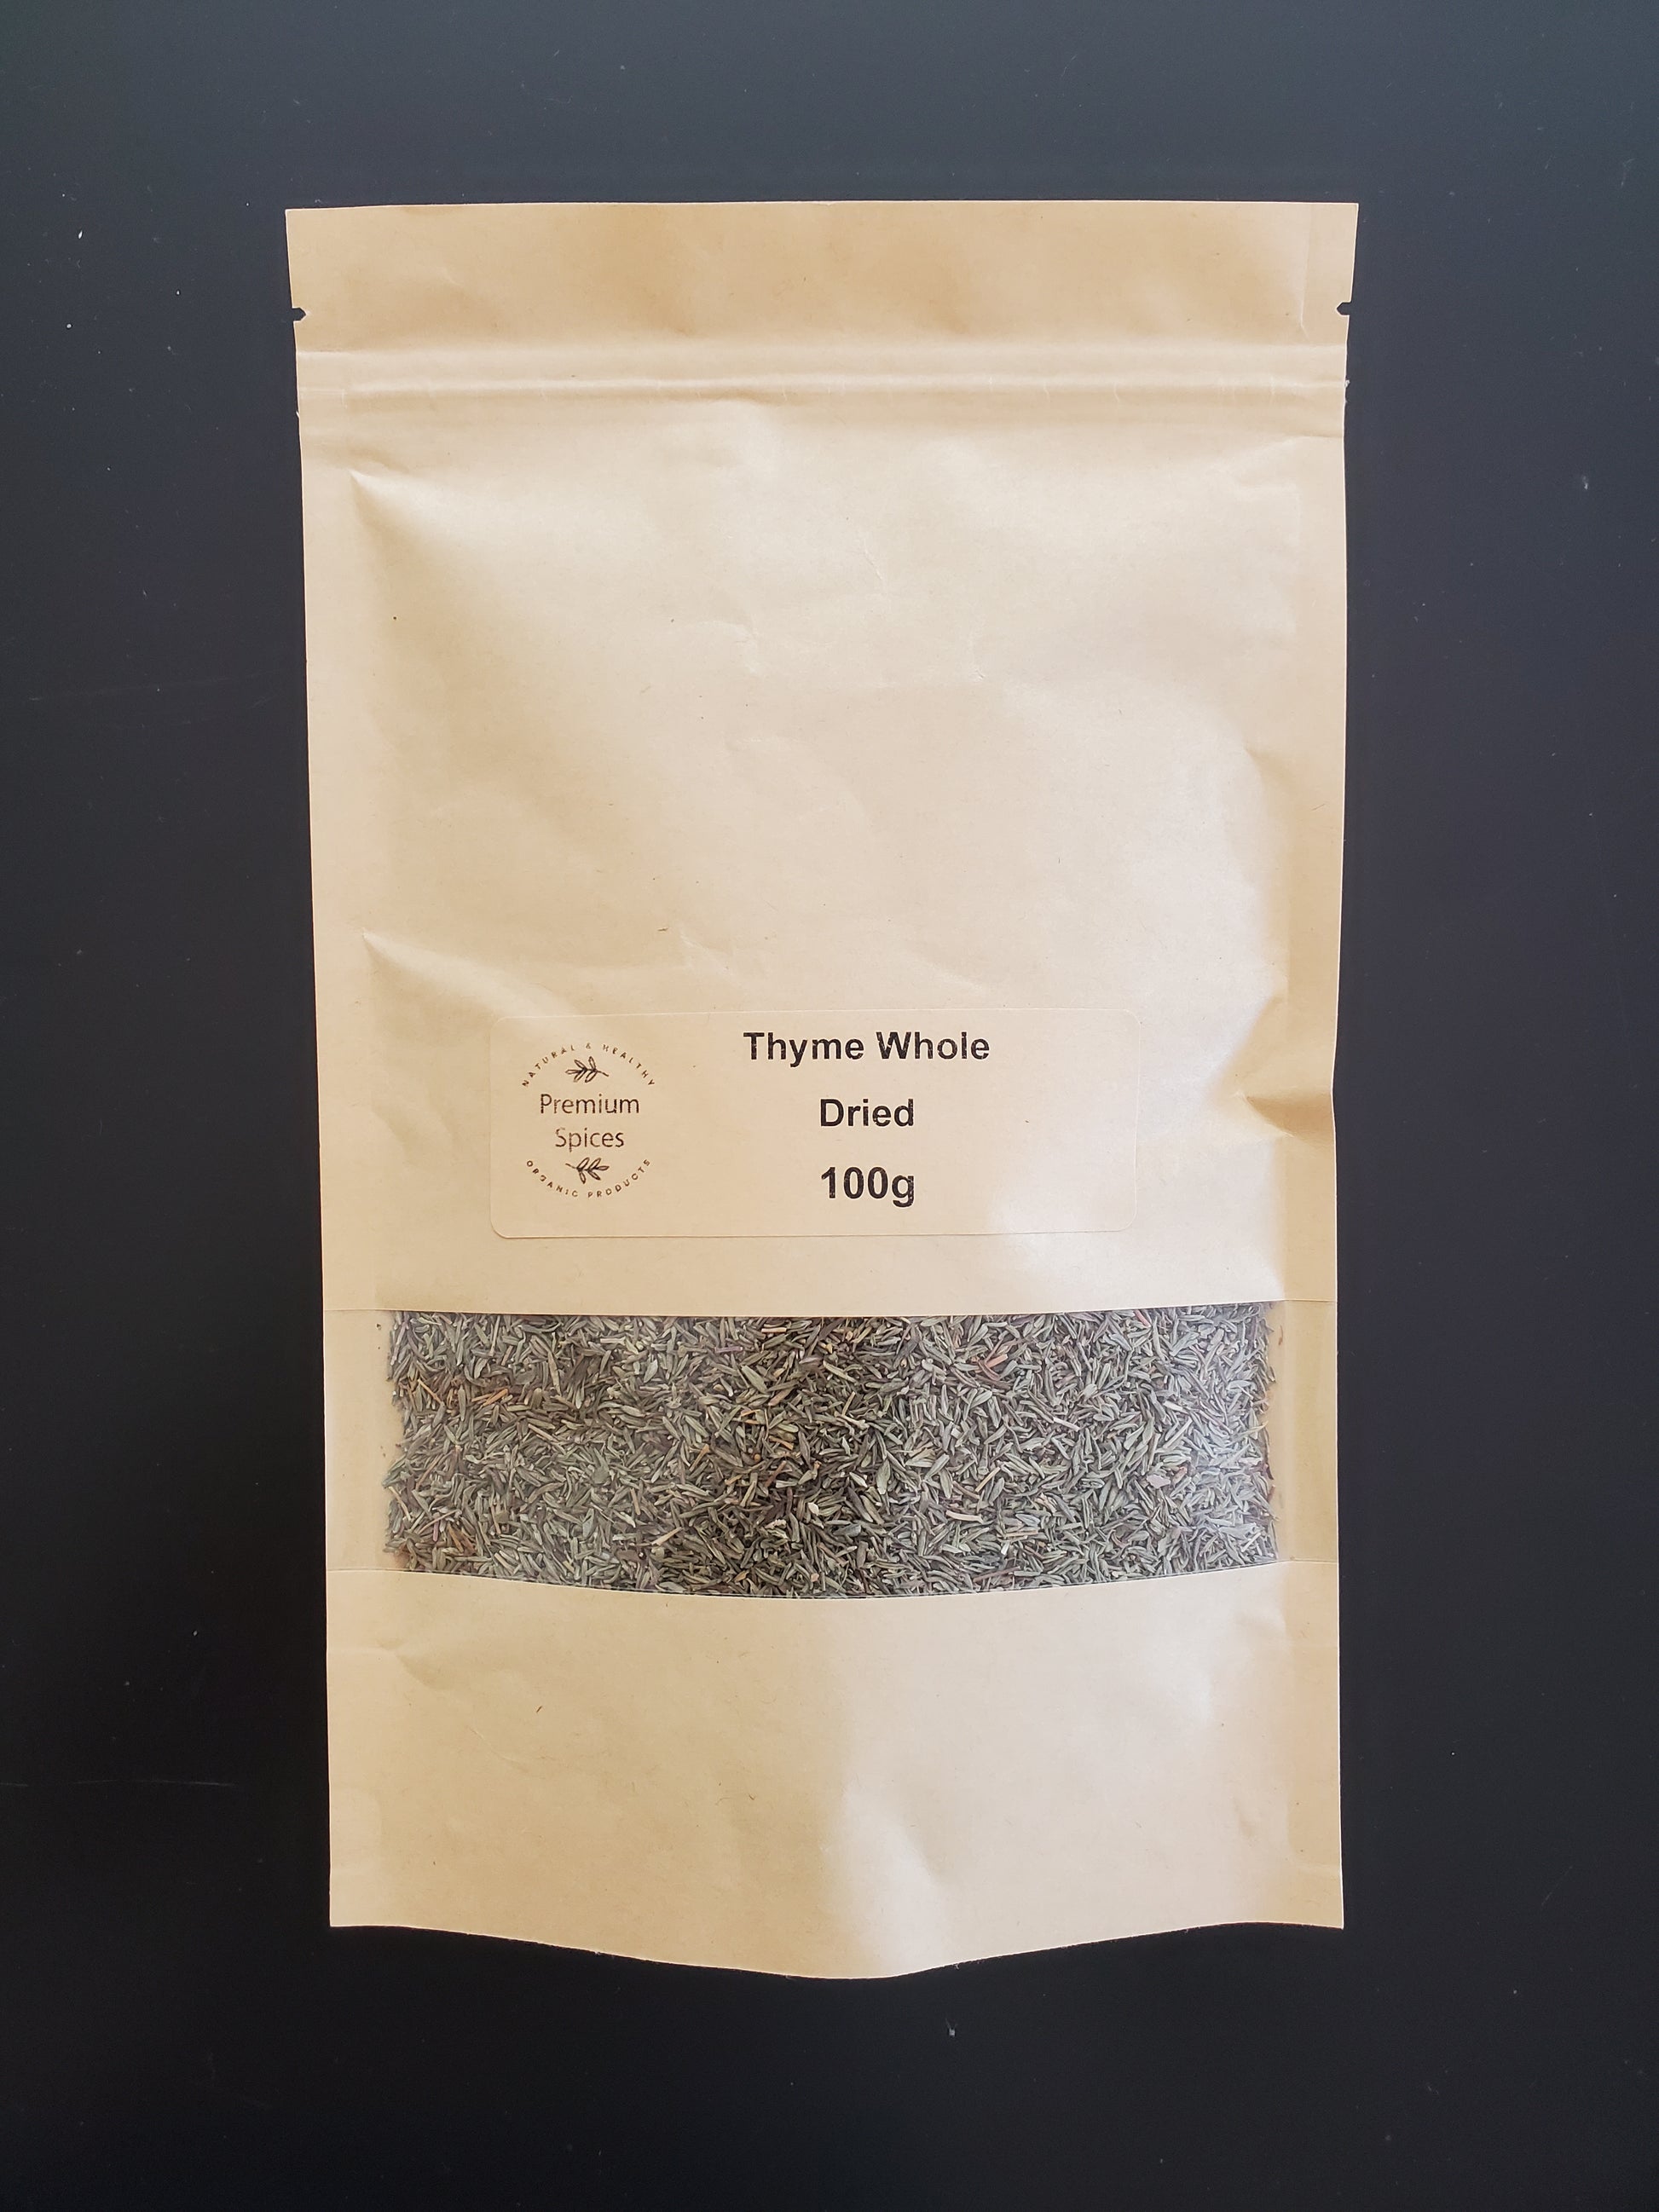 Thyme NZ - BEST PRICE & Highest QUALITY Herb showing 100g pack